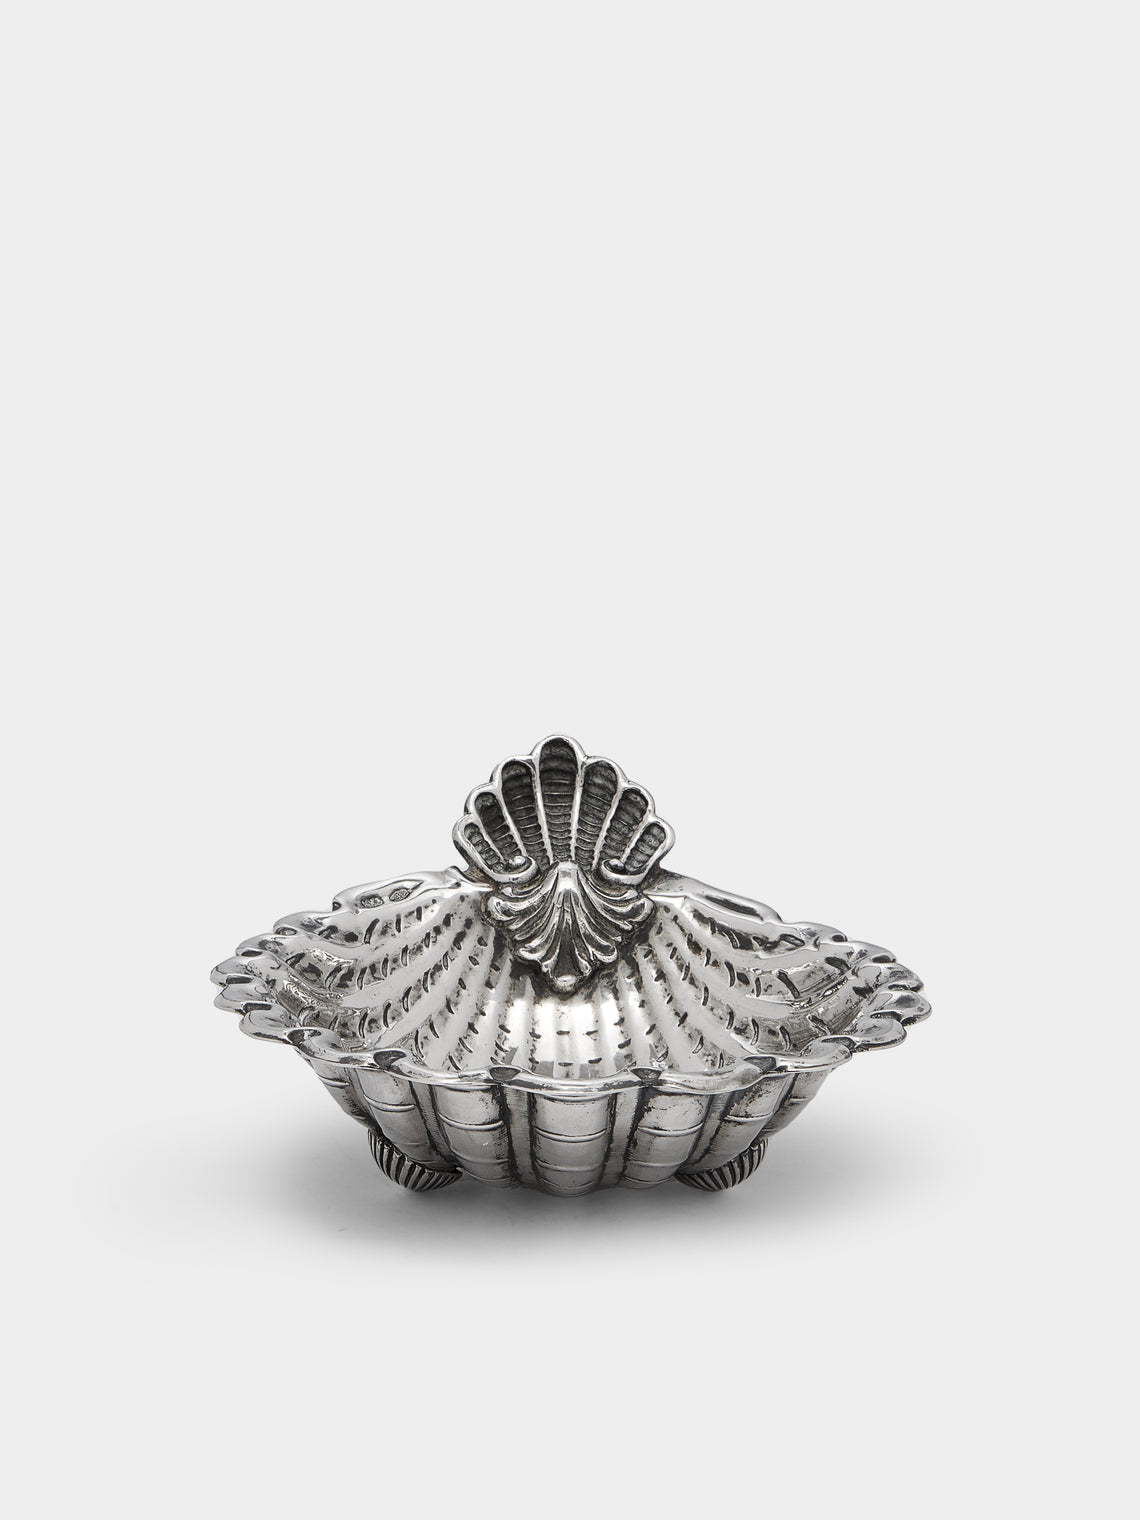 Antique and Vintage - 1940s Solid Silver Shell Dishes (Set of 2) -  - ABASK - 